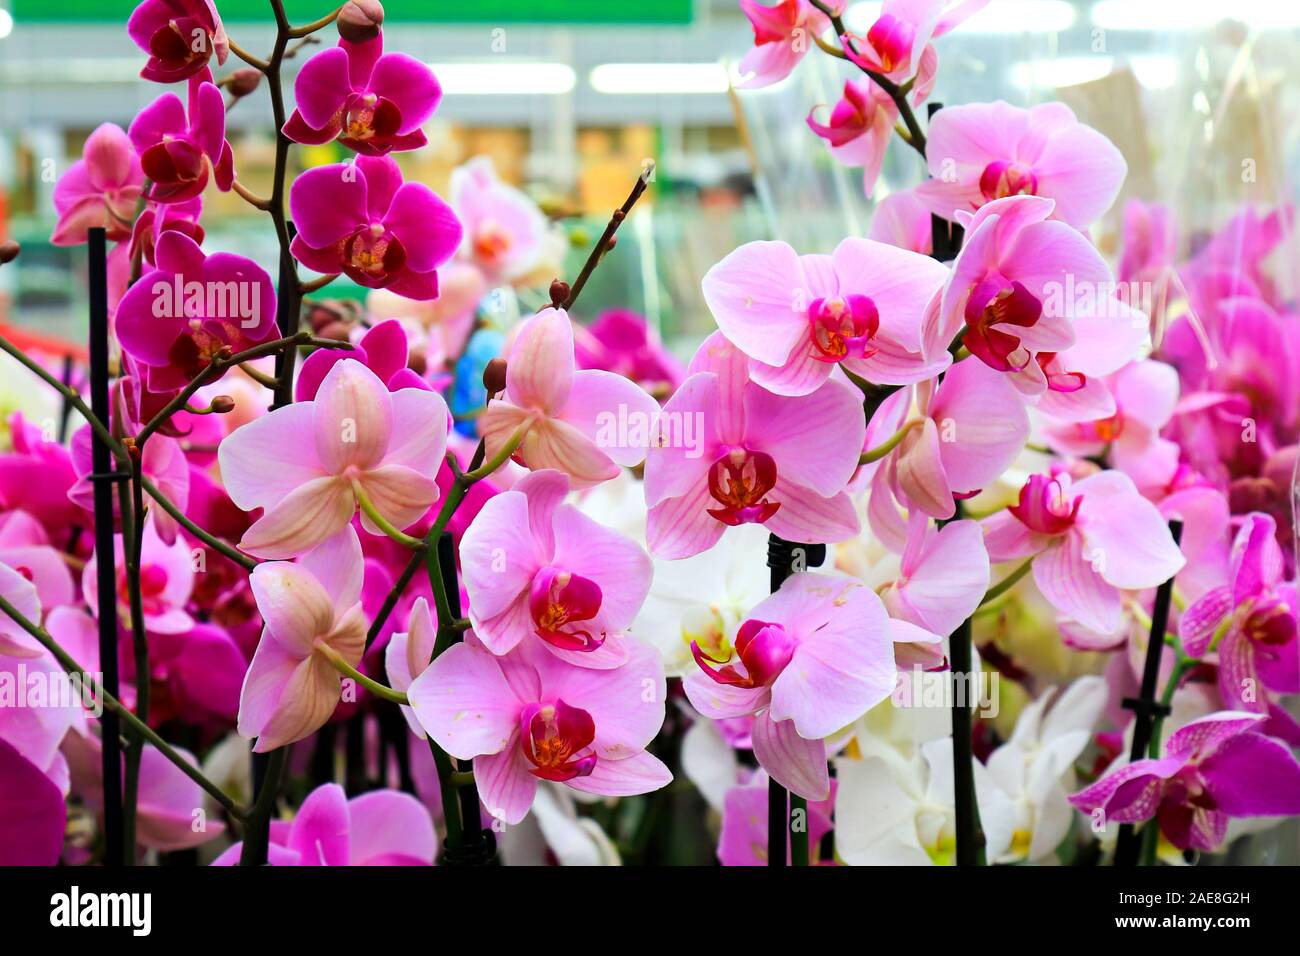 Phalaenopsis Orchid pink flowers  in the store. Many flowering plants, nature floral background. Beautiful flowers at greenhouse. Flower shop, market. Stock Photo